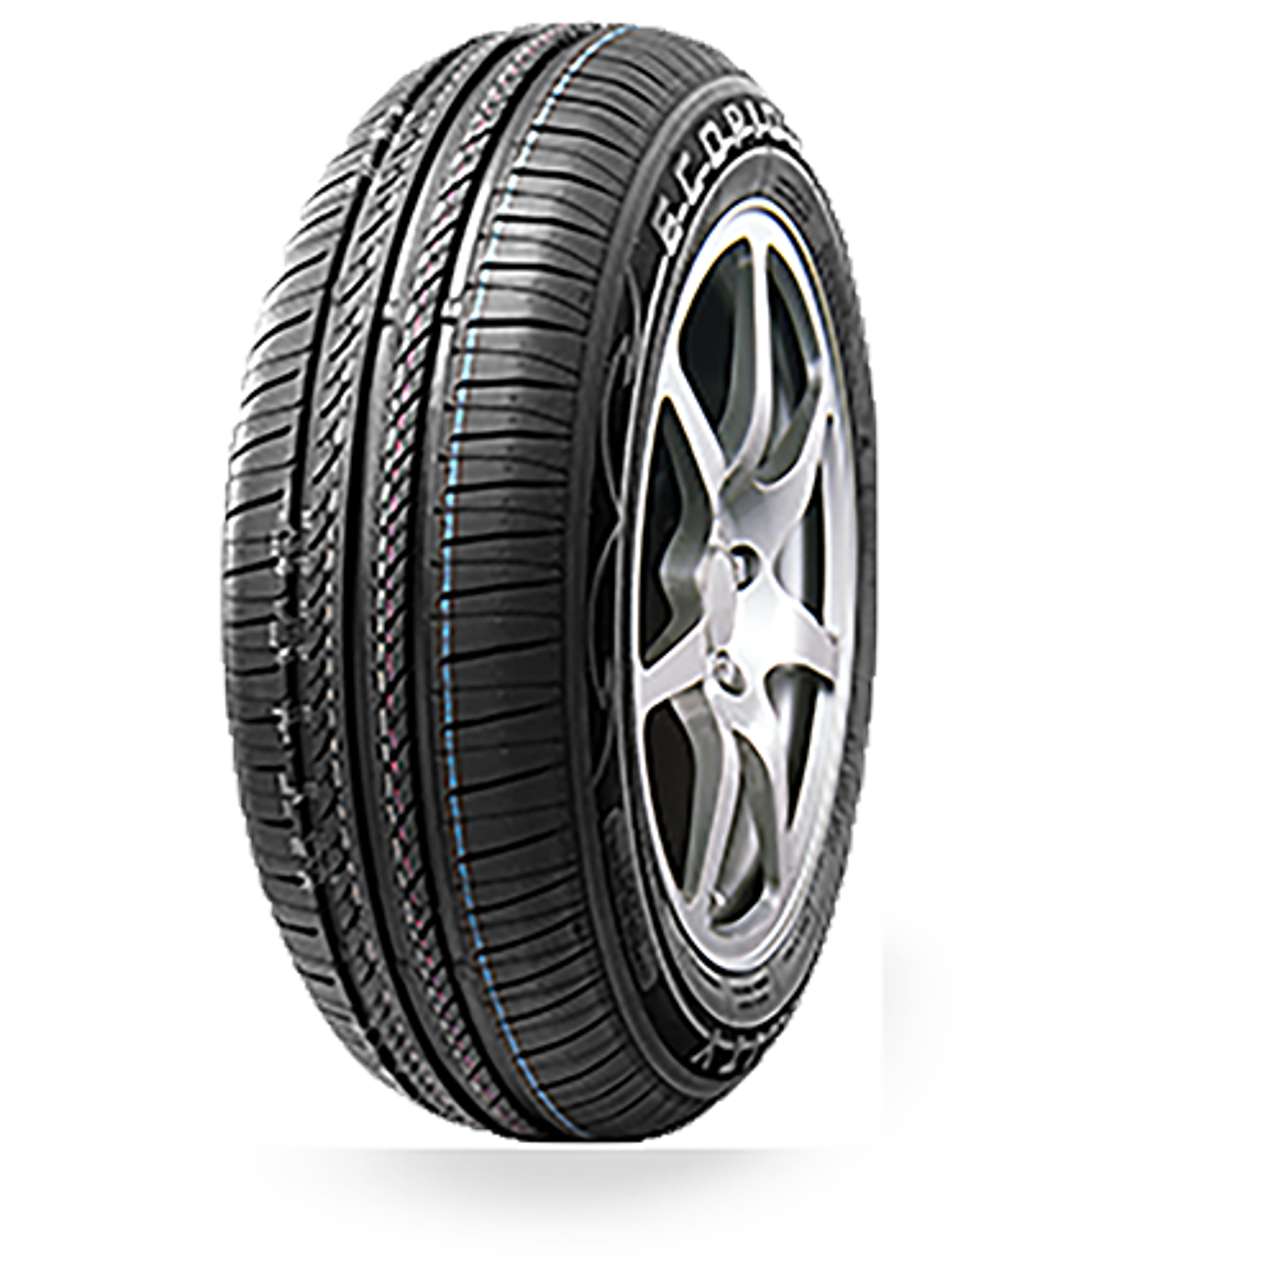 INFINITY ECO PIONEER 175/65R14 82T BSW